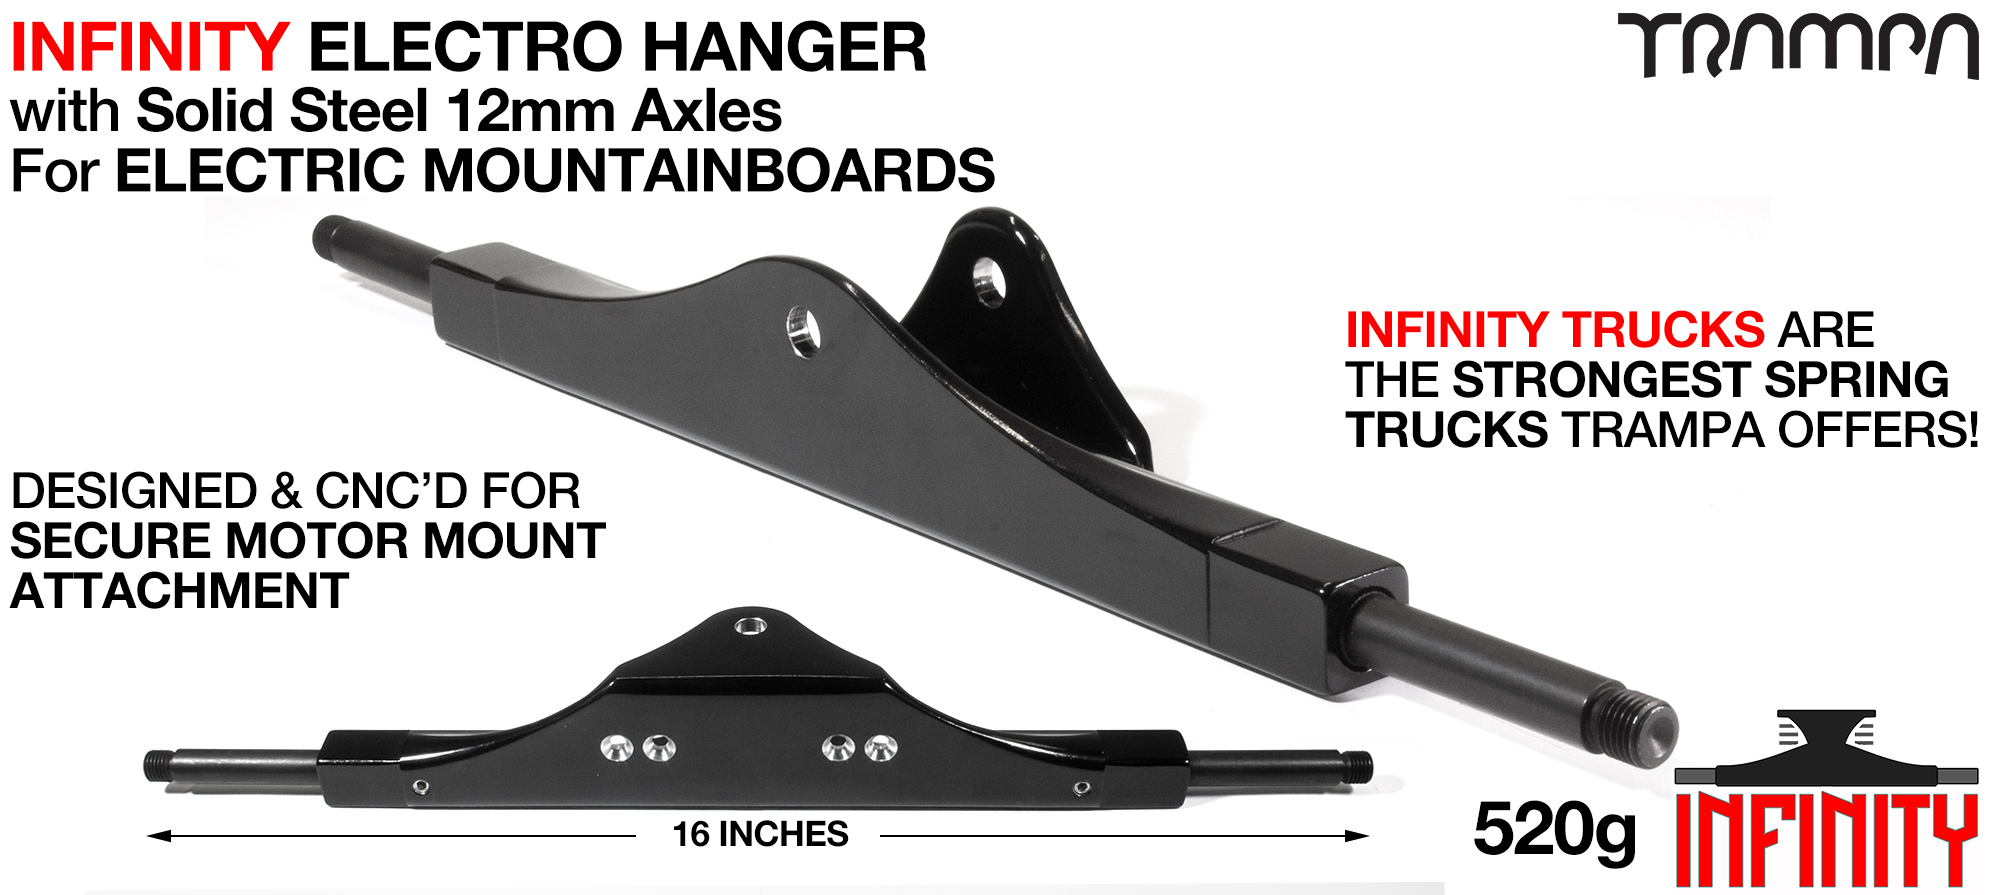 16 inch wide CNC finished INFINITY Motor Mount Hanger with 12mm SOLID Steel Axles - connects with all Spring Truck Baseplates & Mountainboard Motor Mounts